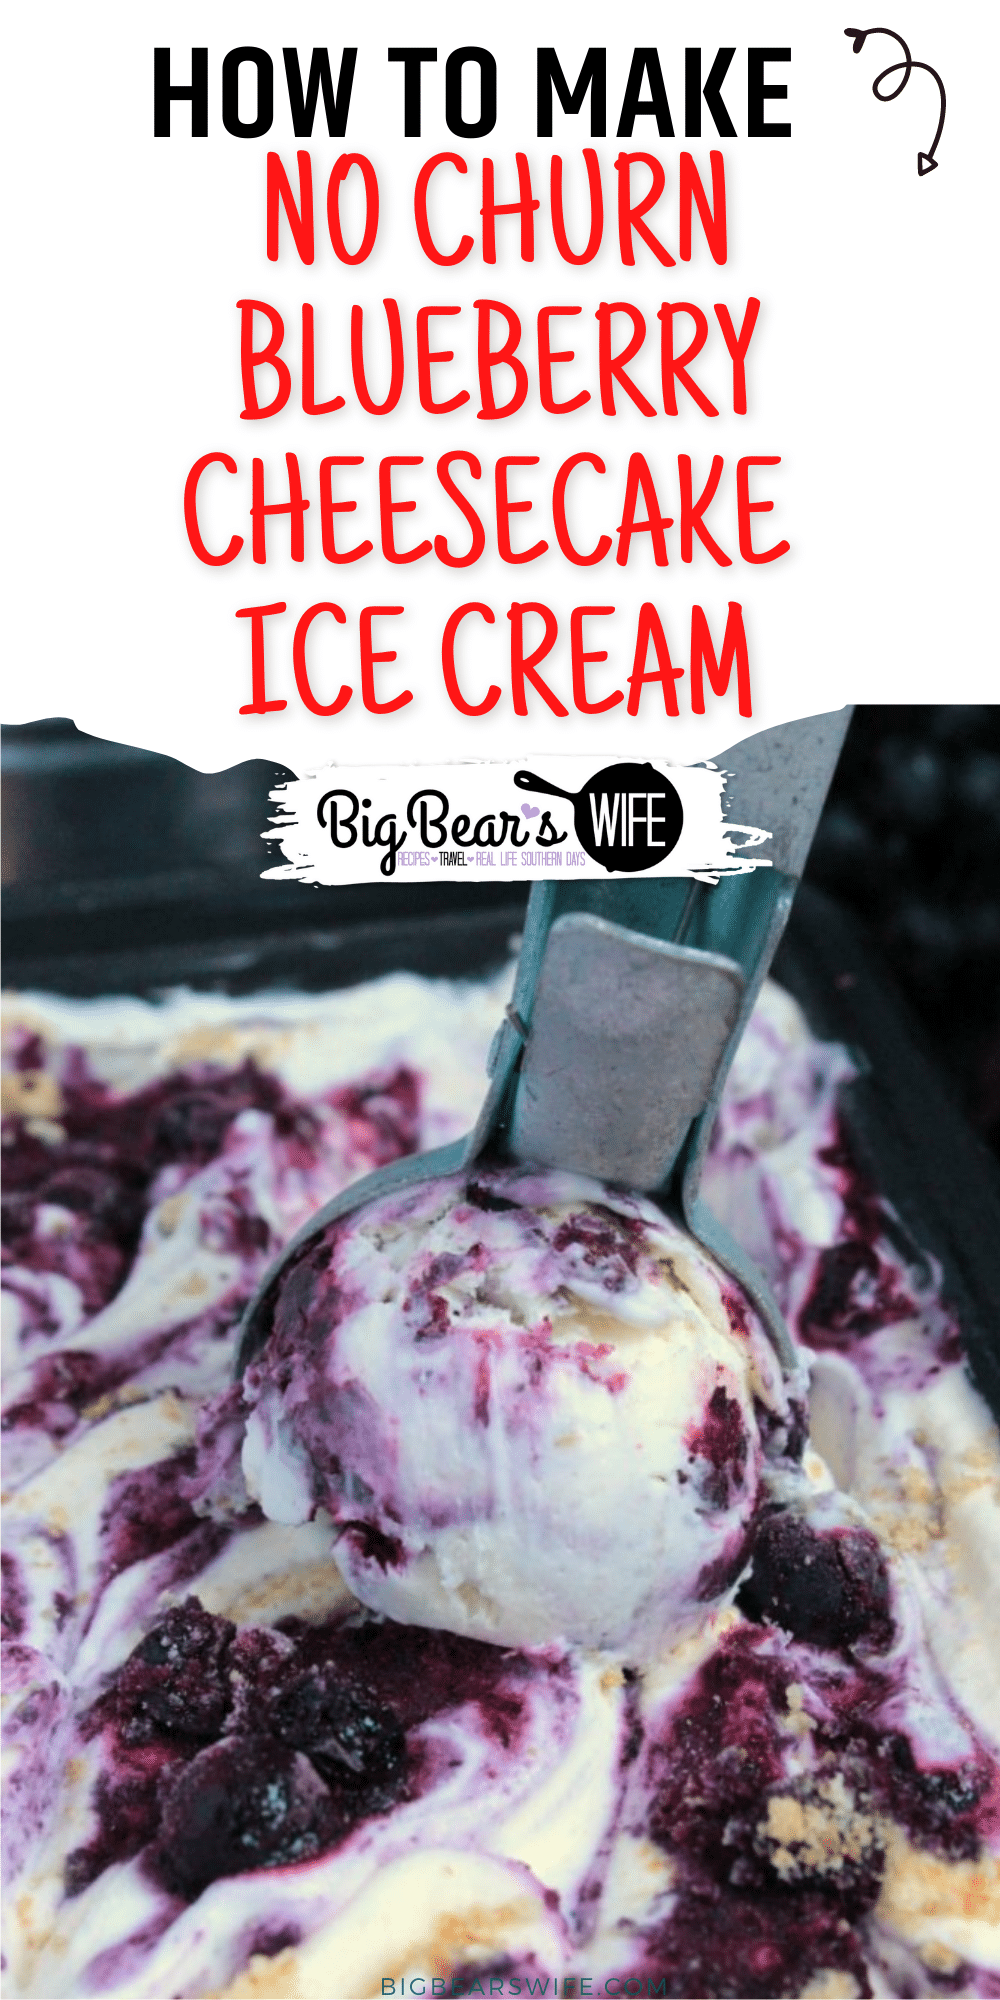 You don’t even need an ice cream maker to make this sweet dessert! This No Churn Blueberry Cheesecake Ice Cream is swirled with a blueberry cheesecake filling and crushed graham crackers! via @bigbearswife